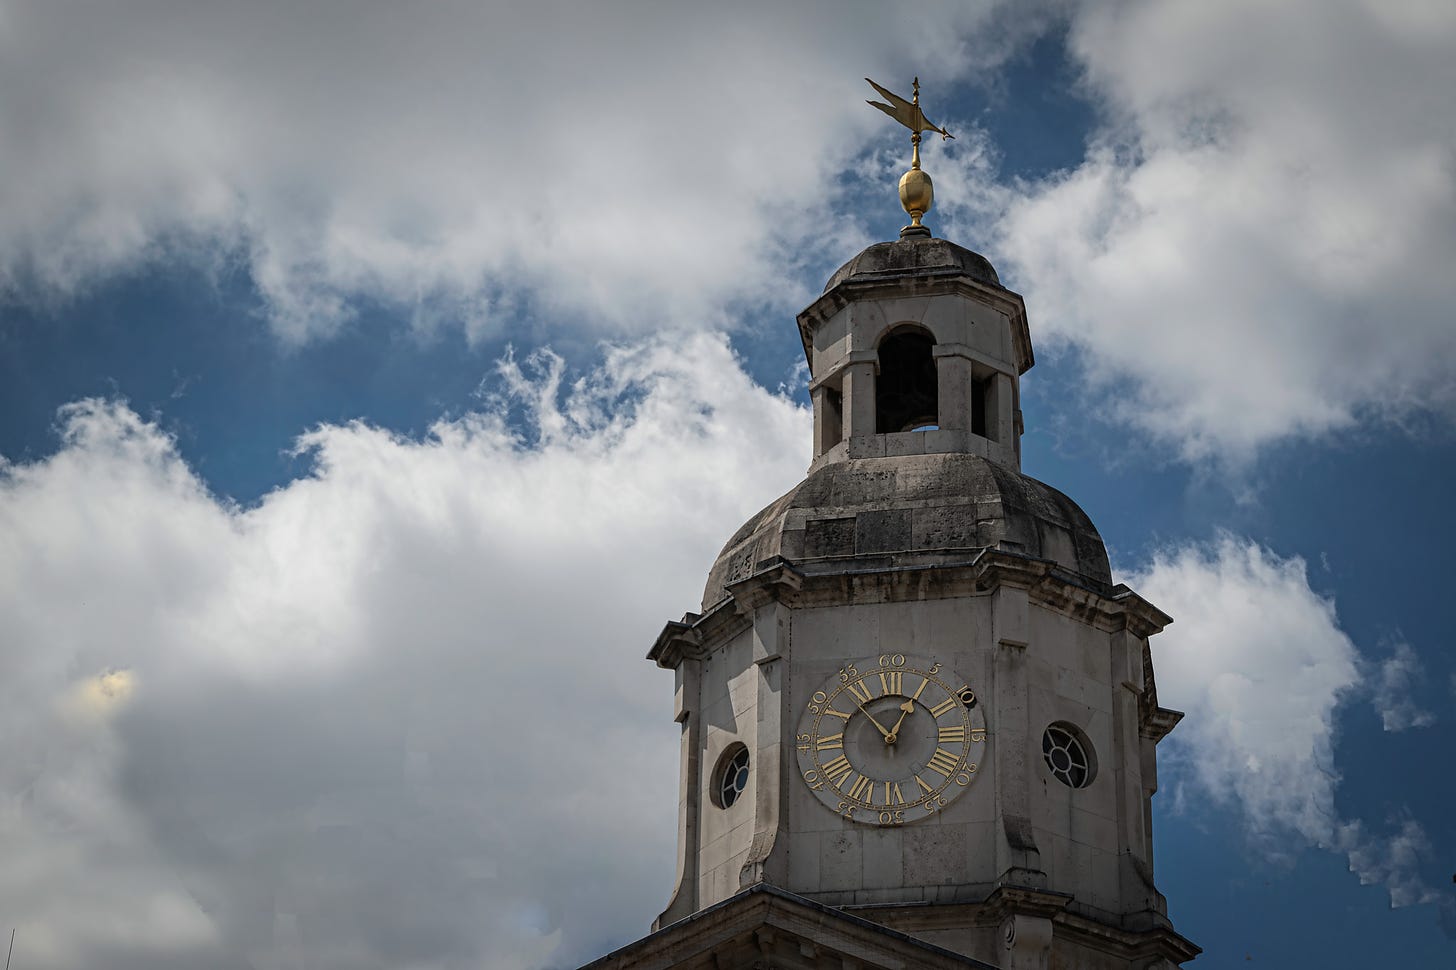 The tower of a building in London with a clock with  Roman numeral sat on one side, the time 12:52 and a weather vane on top  against a blue sky and large fluffy white and grey clouds